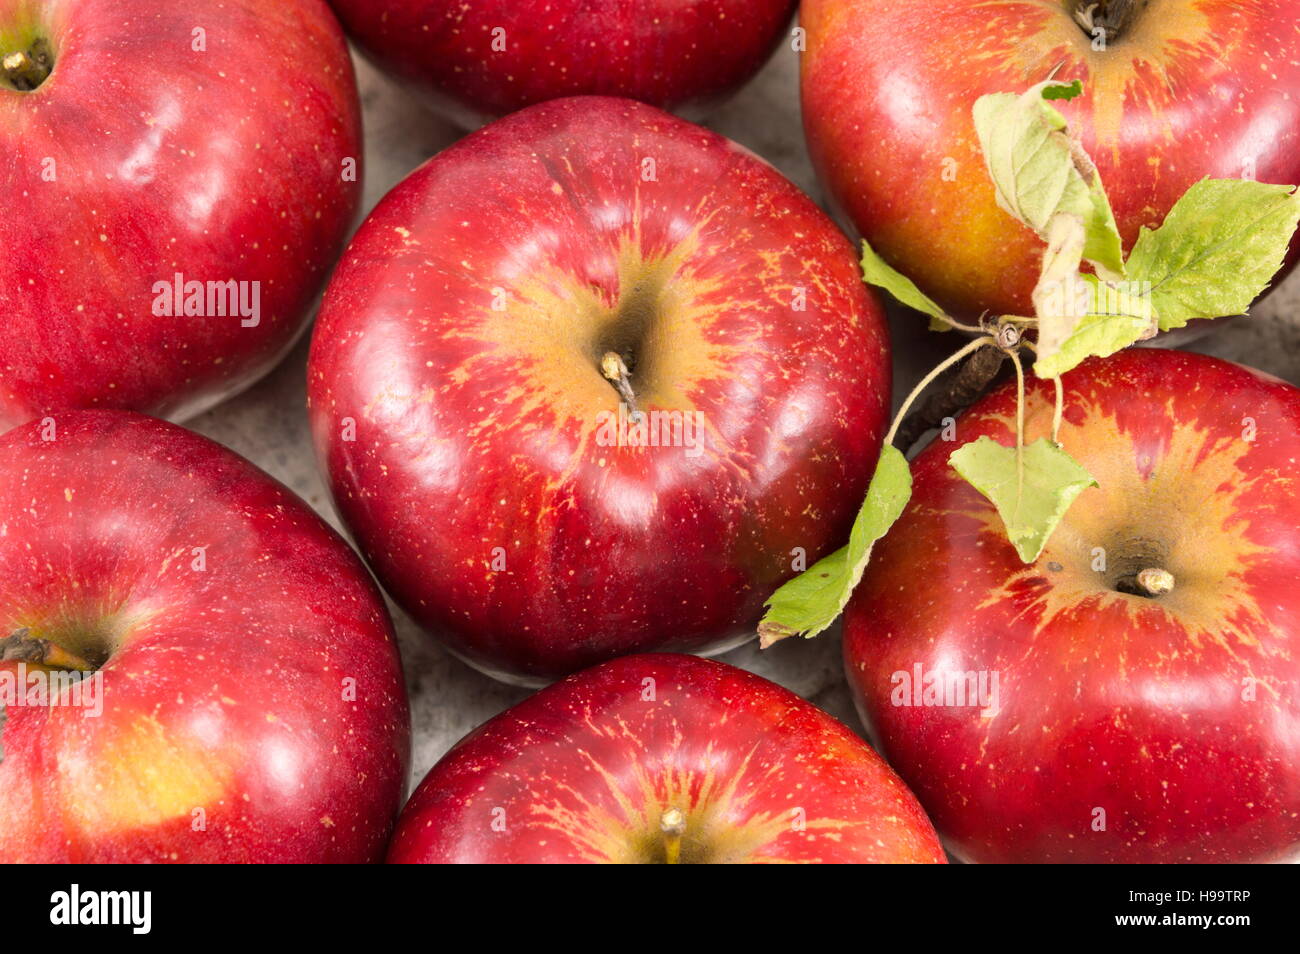 Freshly picked red apples on a plate close up Stock Photo